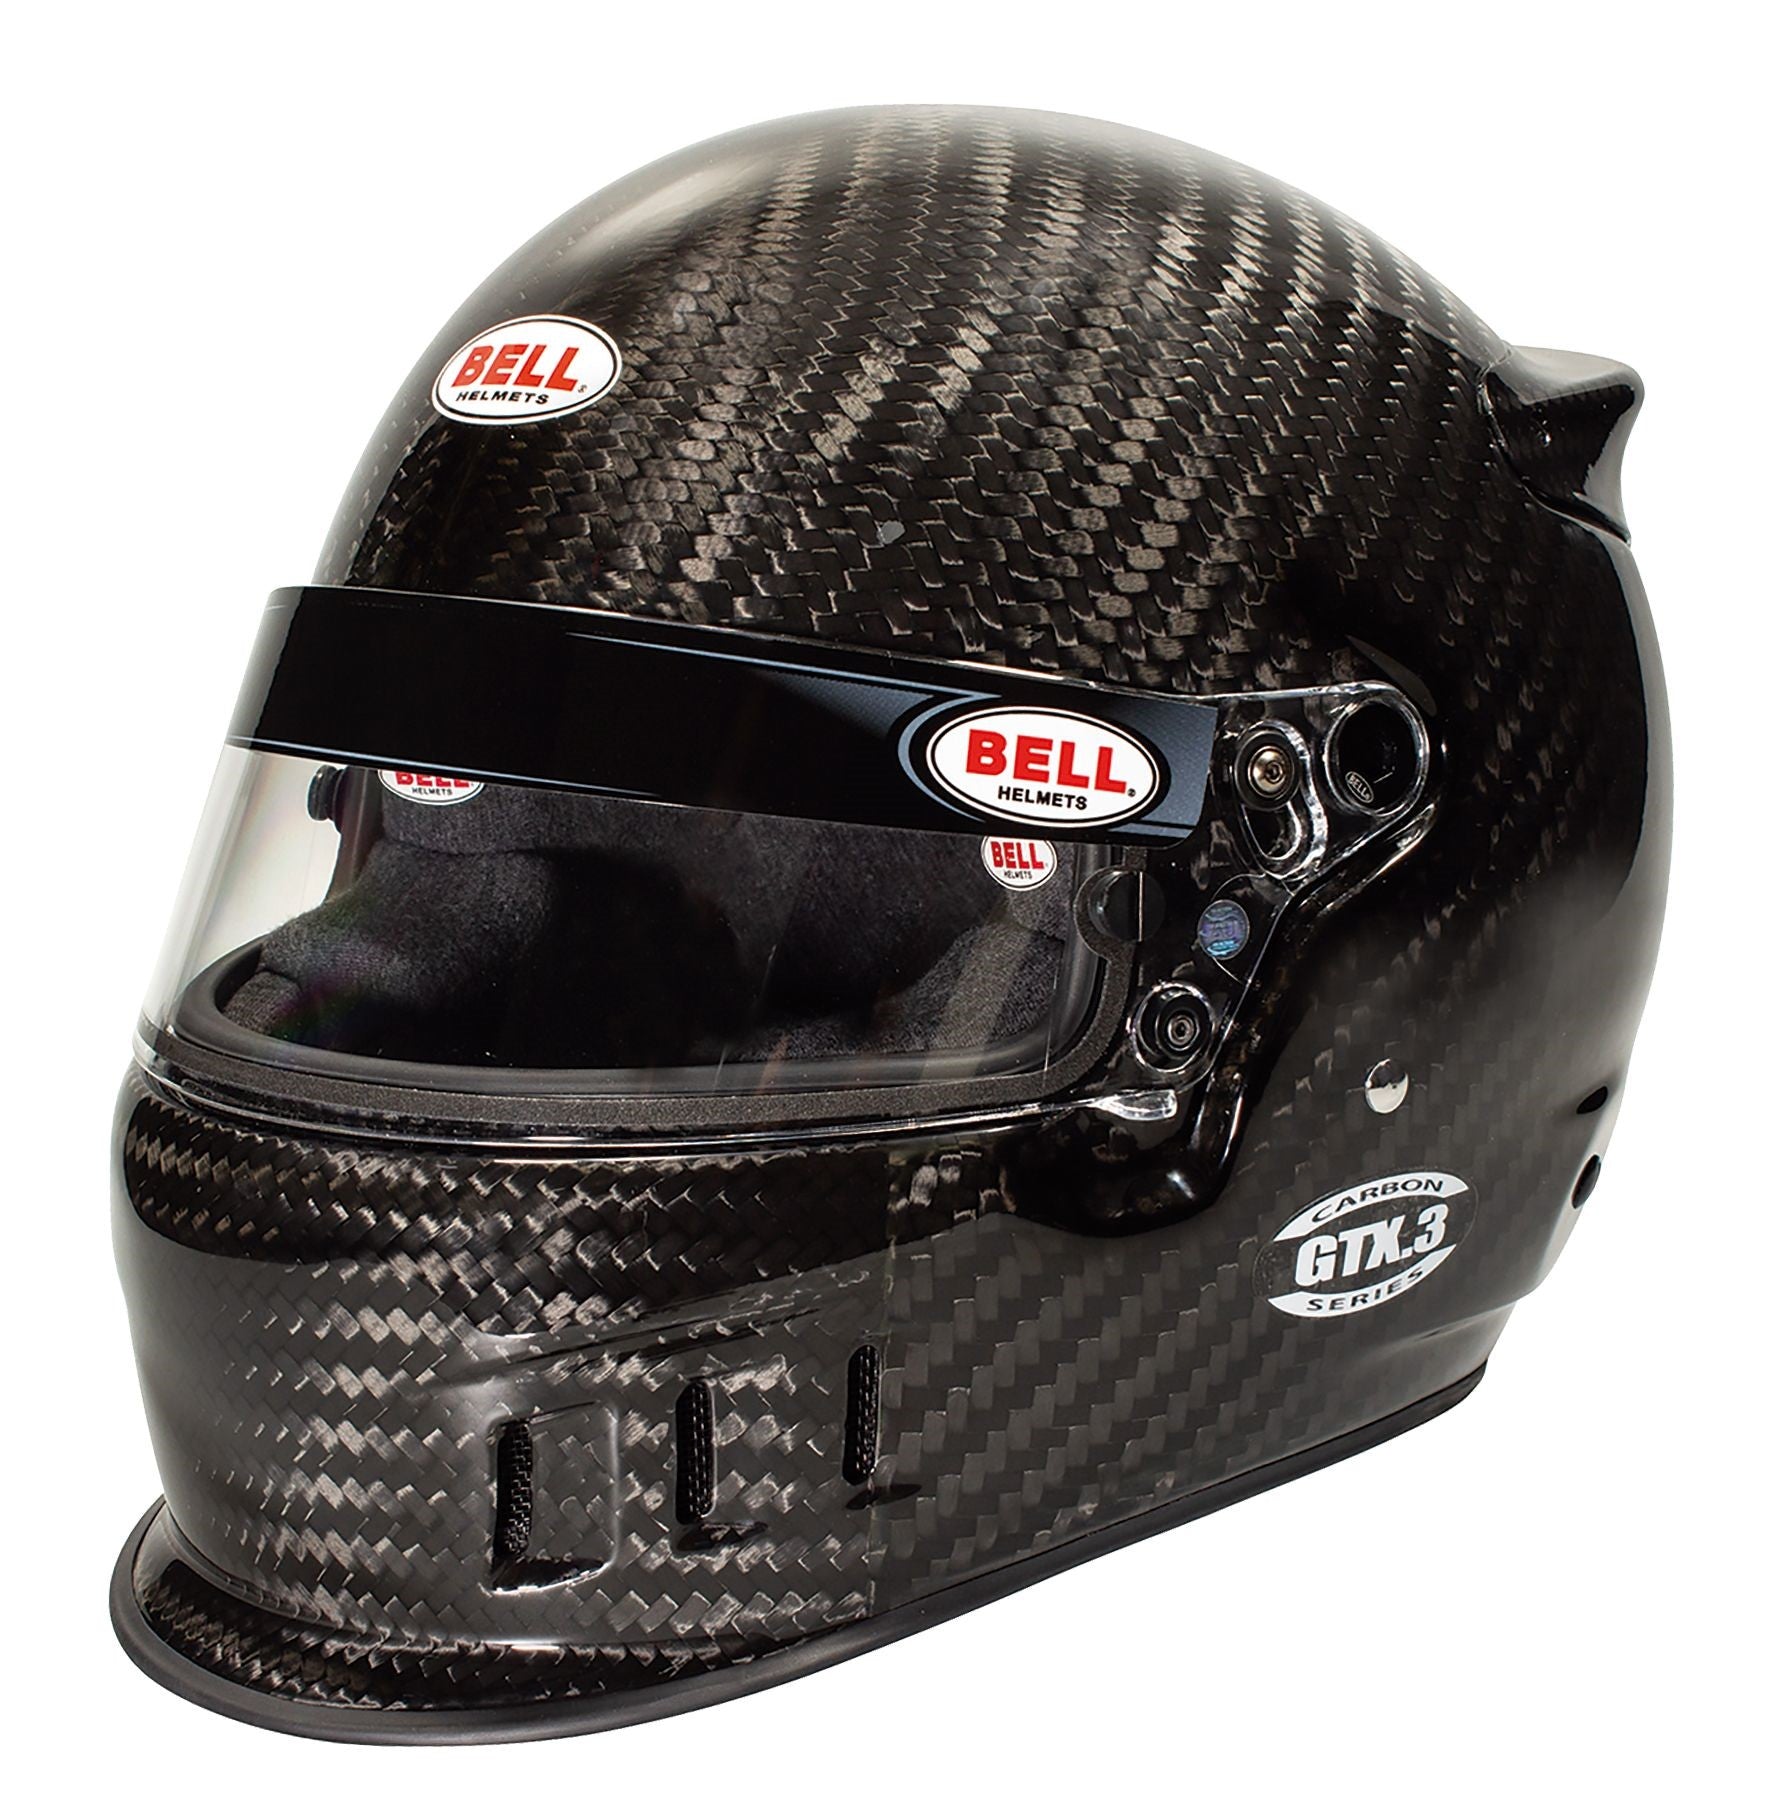 Snell Helmet Certifications: What’s The Difference between SA2015 and SA2020?